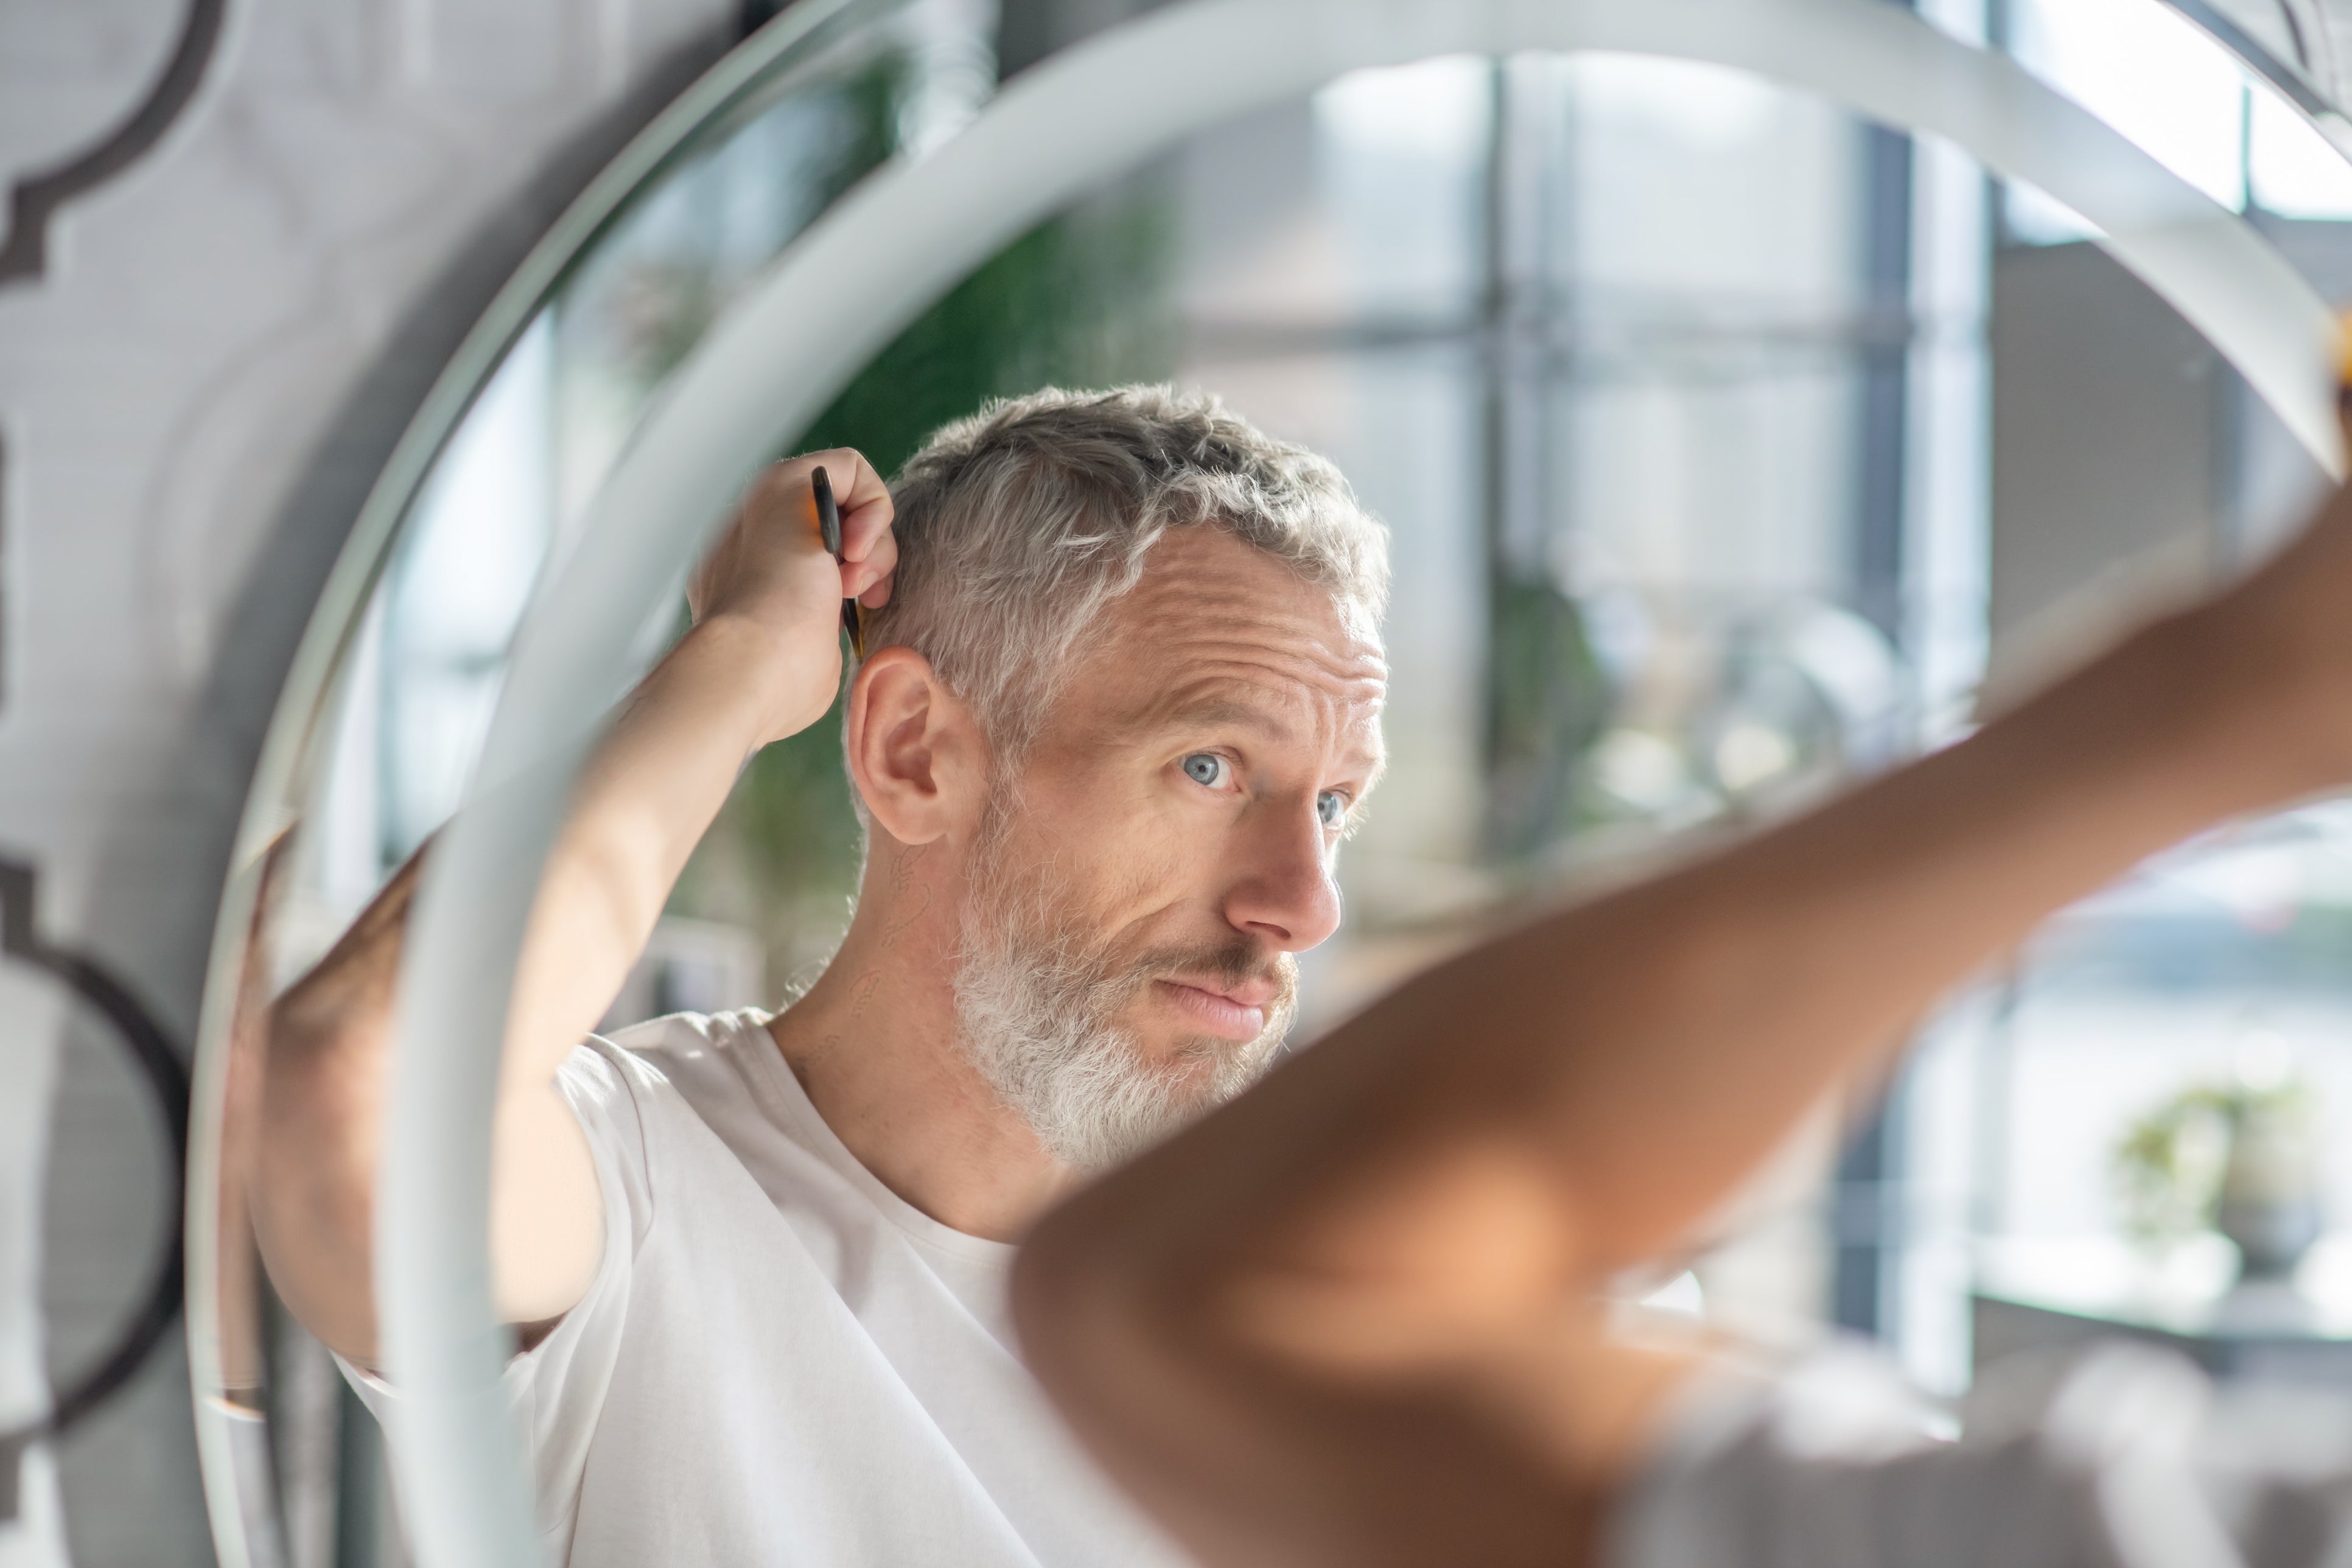 Can You Stop Your Hair From Greying?